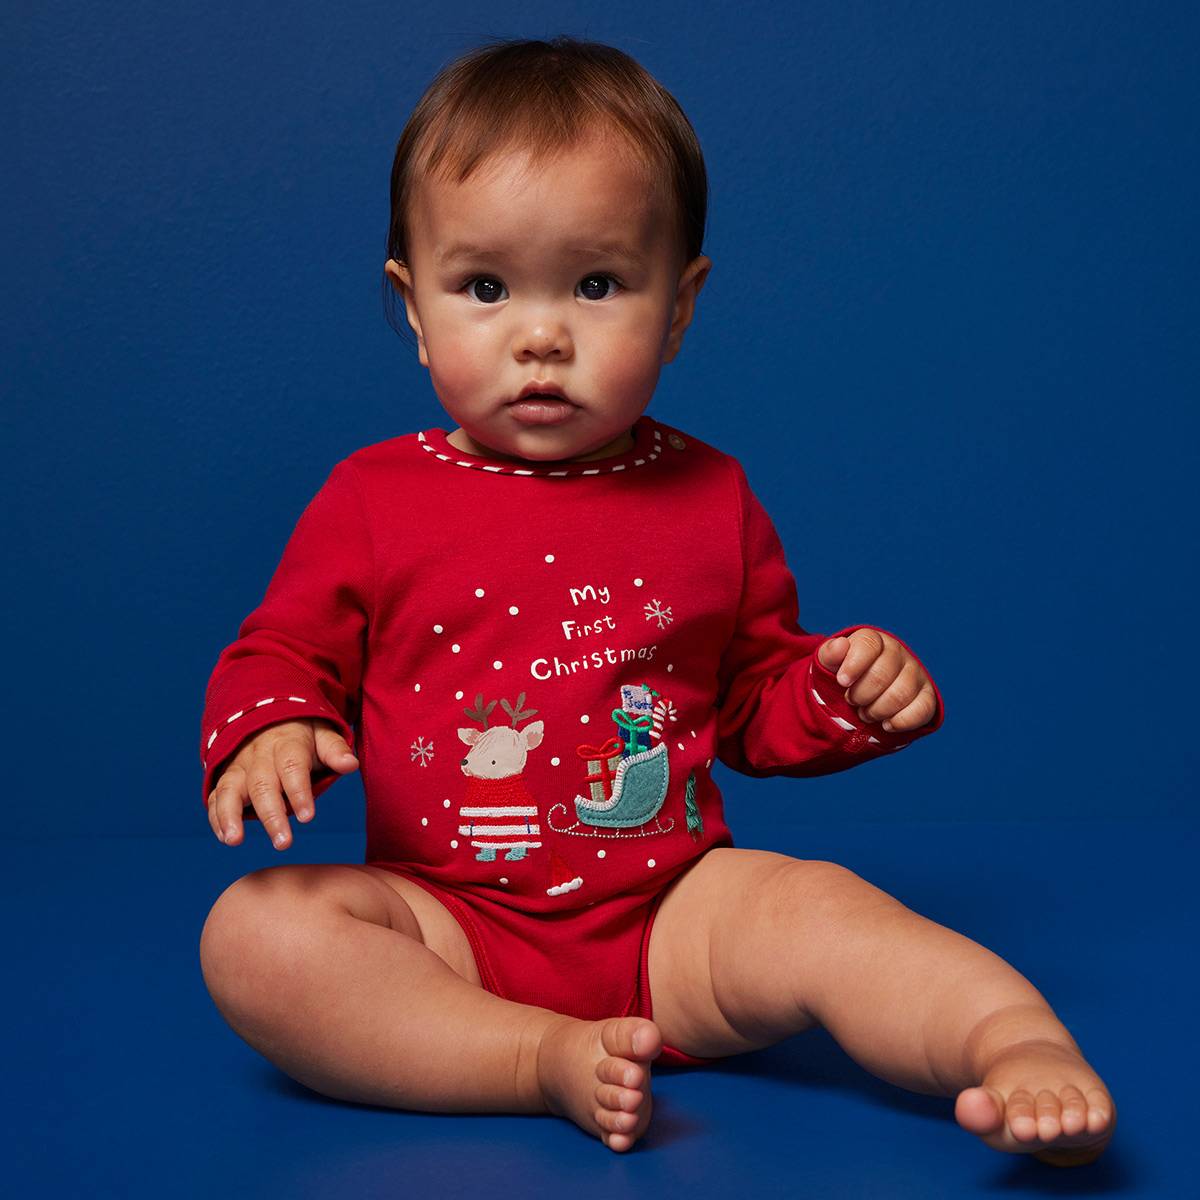 Baby wearing red bodysuit. Shop baby gifts